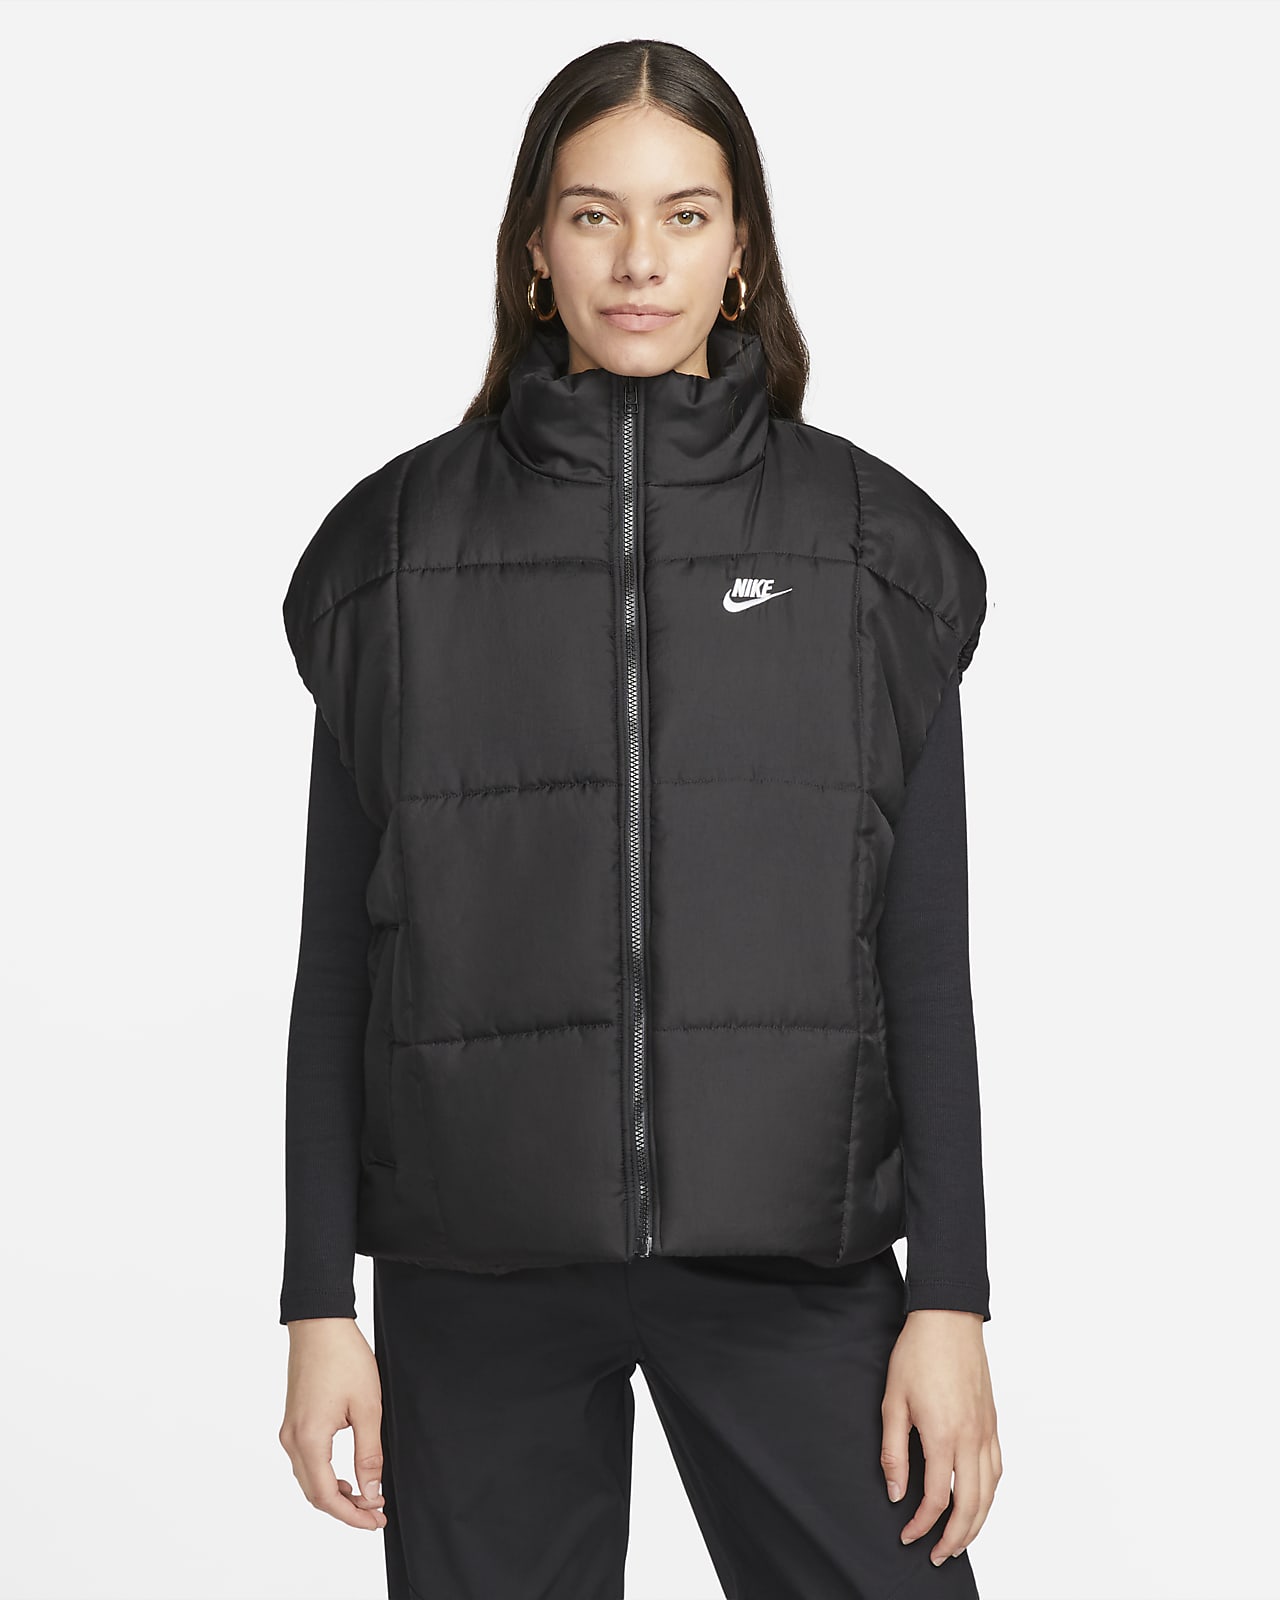 Veste sans manches ample Therma-FIT Nike Sportswear Classic Puffer pour femme